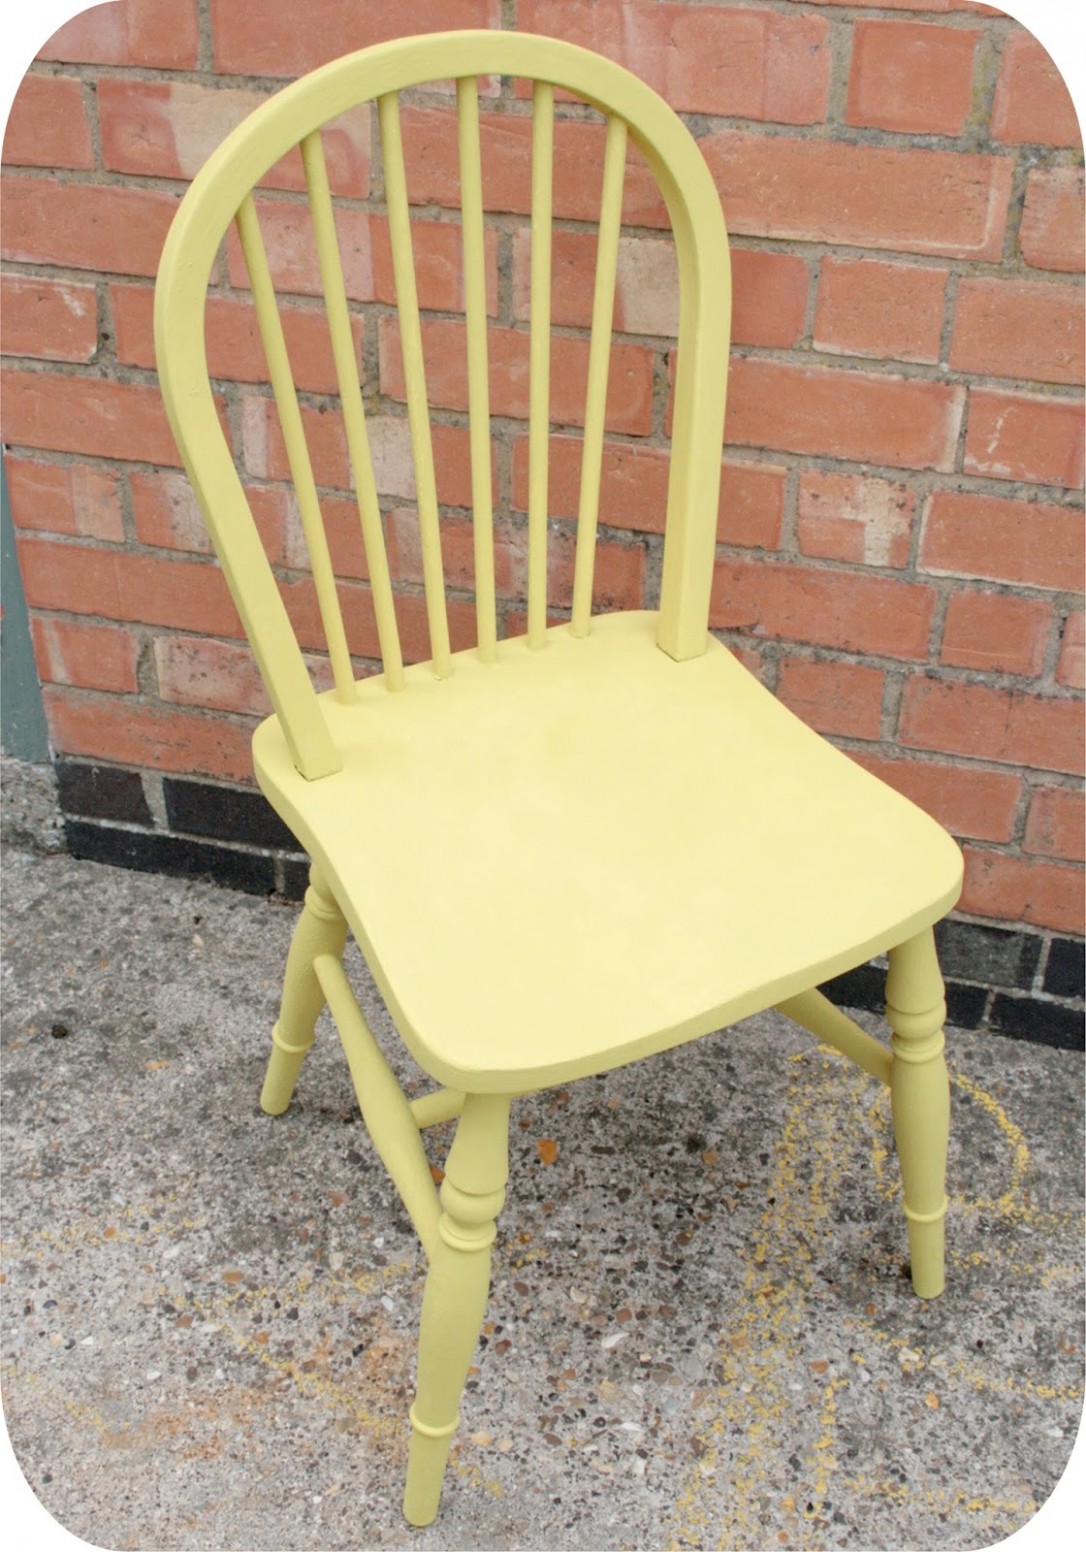 Hesperoo: Chalk Paint Chair How To Chalk Paint Wooden Chairs